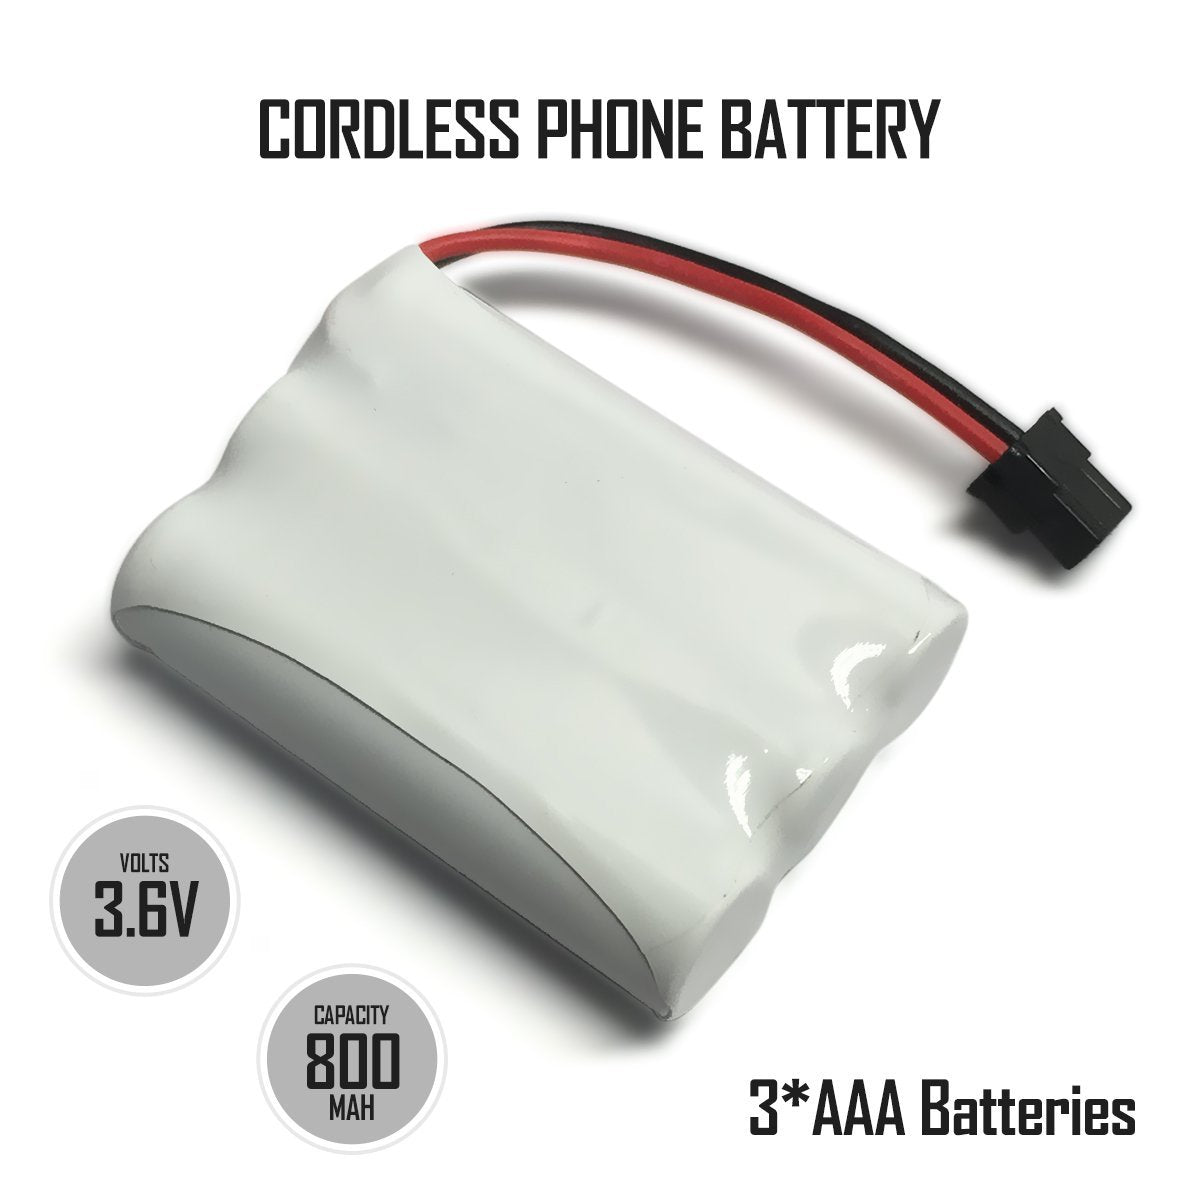 Aastra MOD. B (Plug-in) Cordless Phone Battery